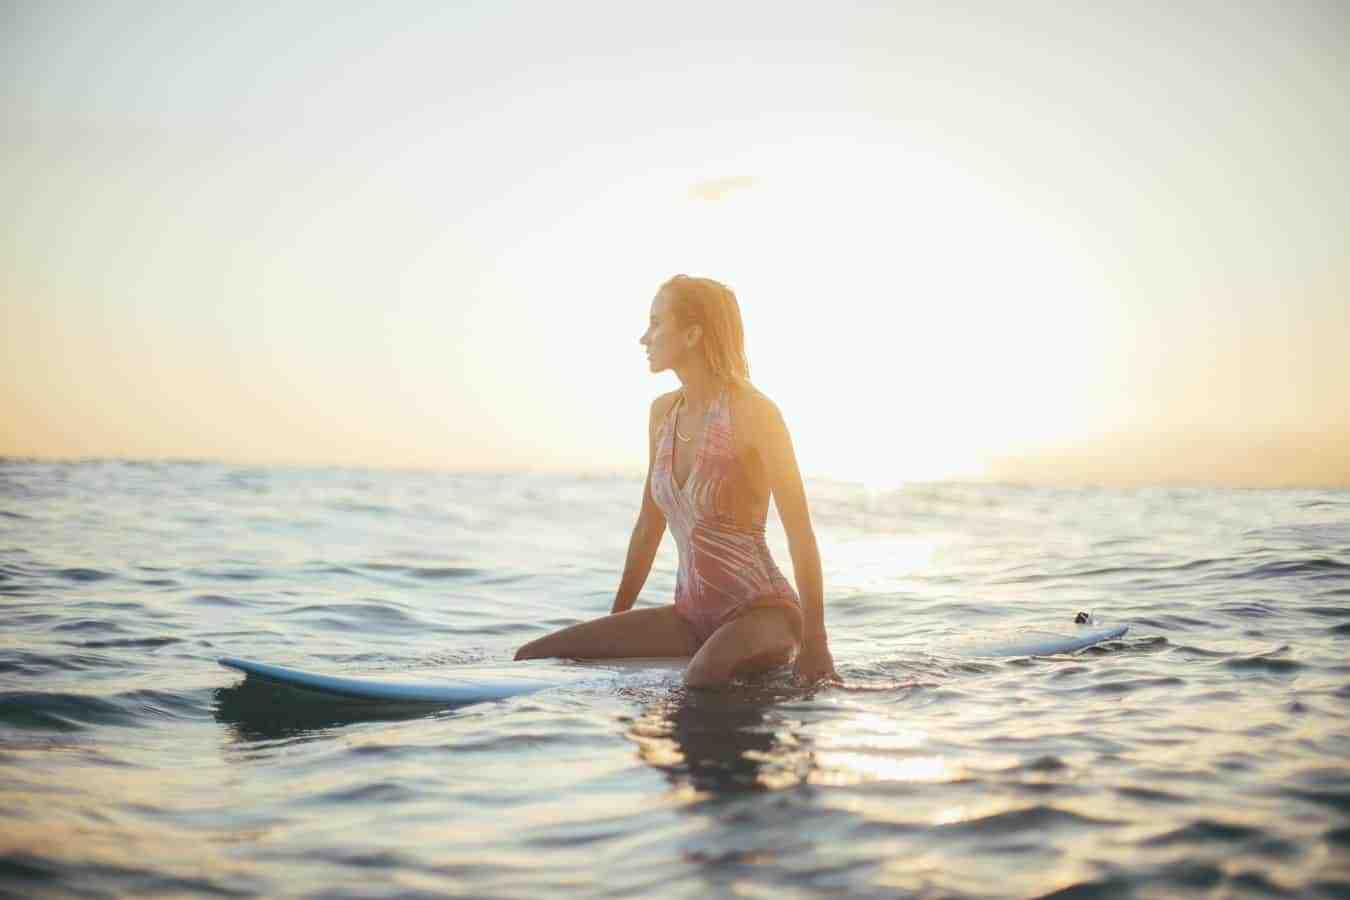 How long does it take the average person to learn to surf?